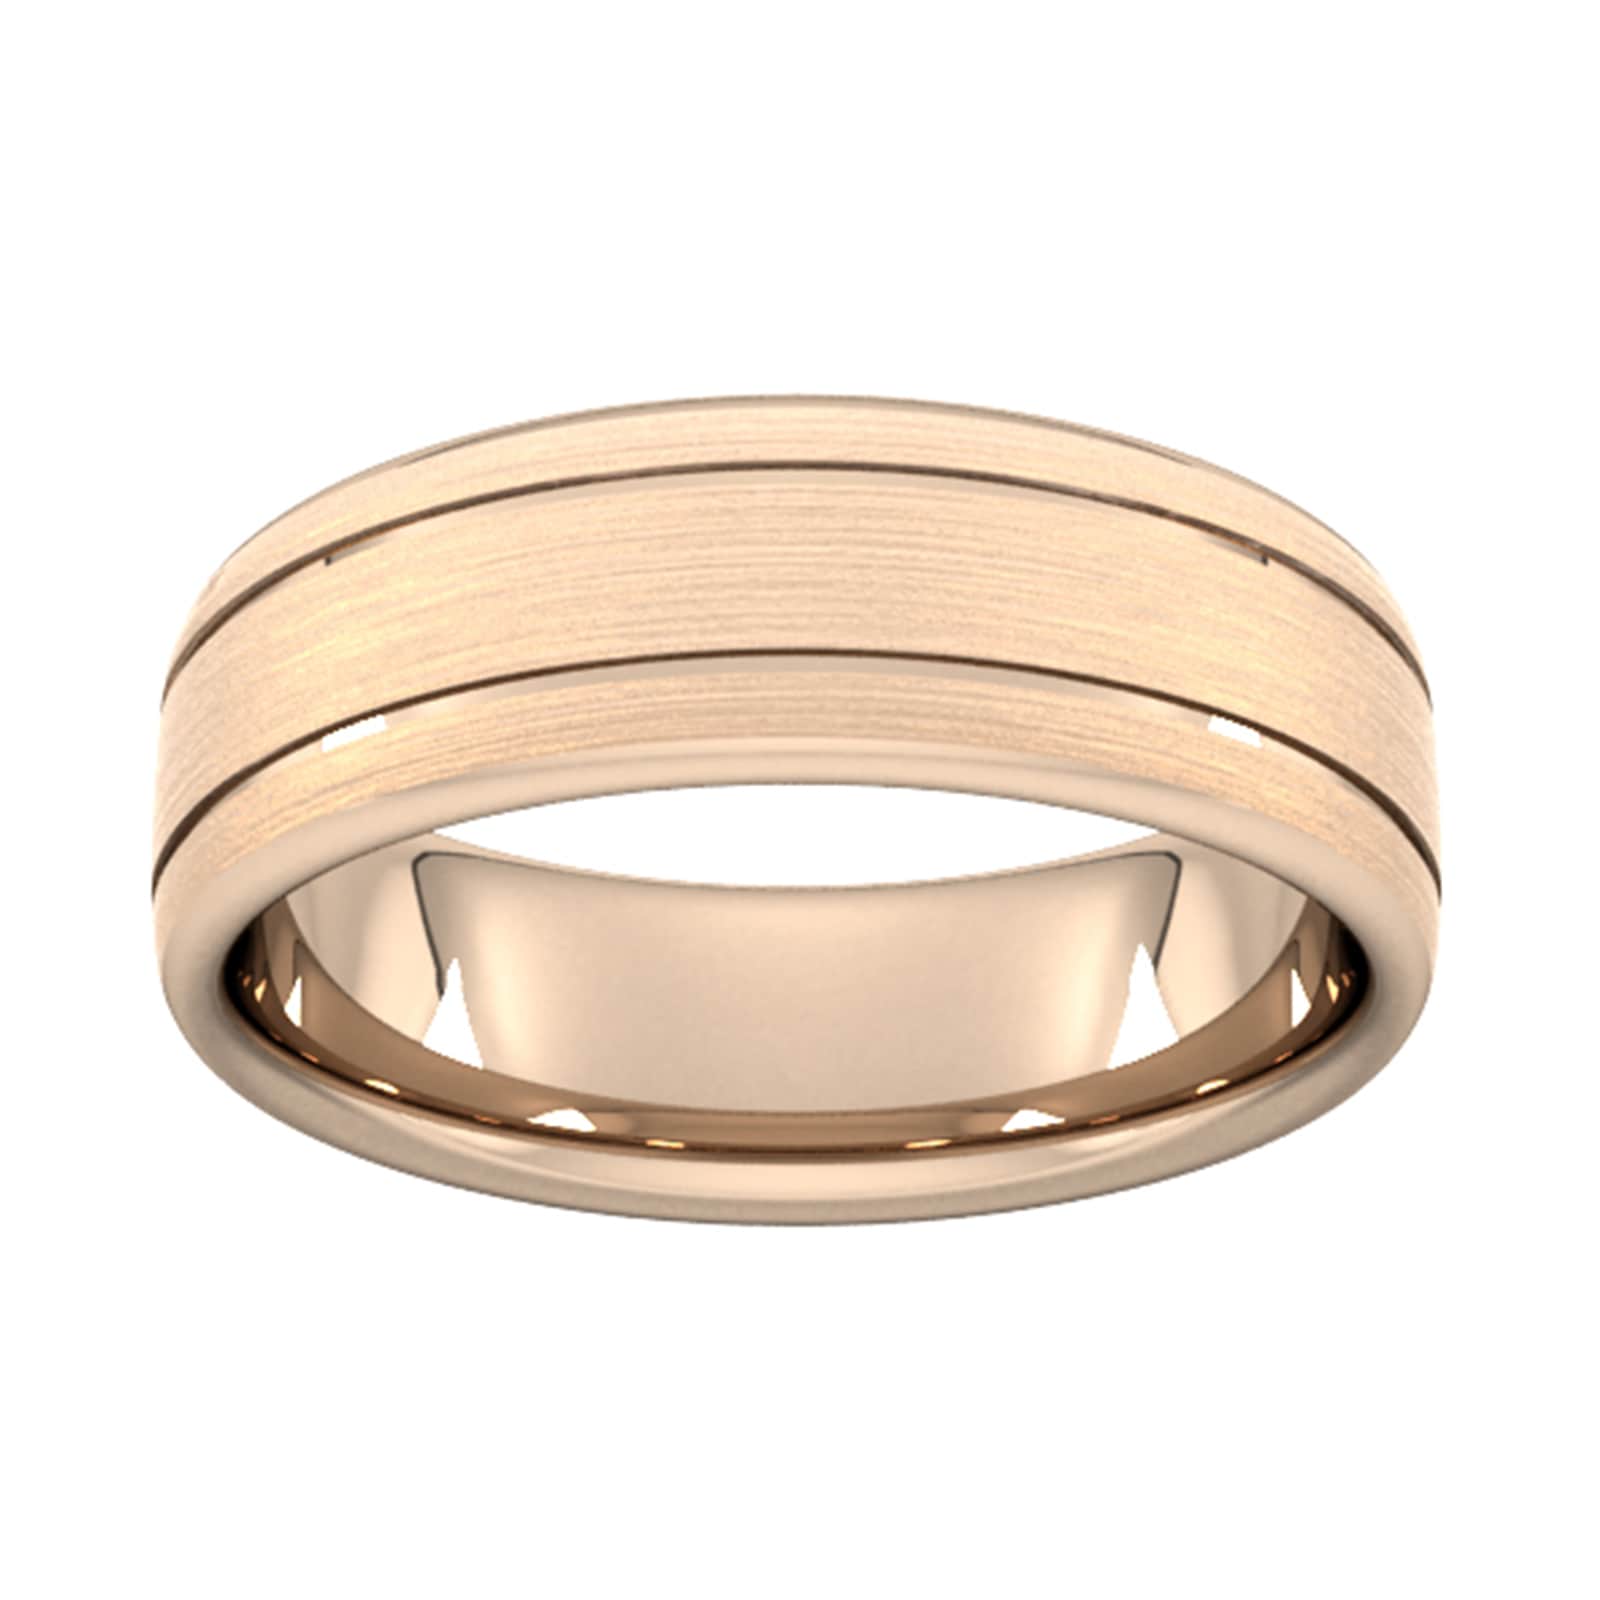 7mm Slight Court Extra Heavy Matt Finish With Double Grooves Wedding Ring In 9 Carat Rose Gold - Ring Size U